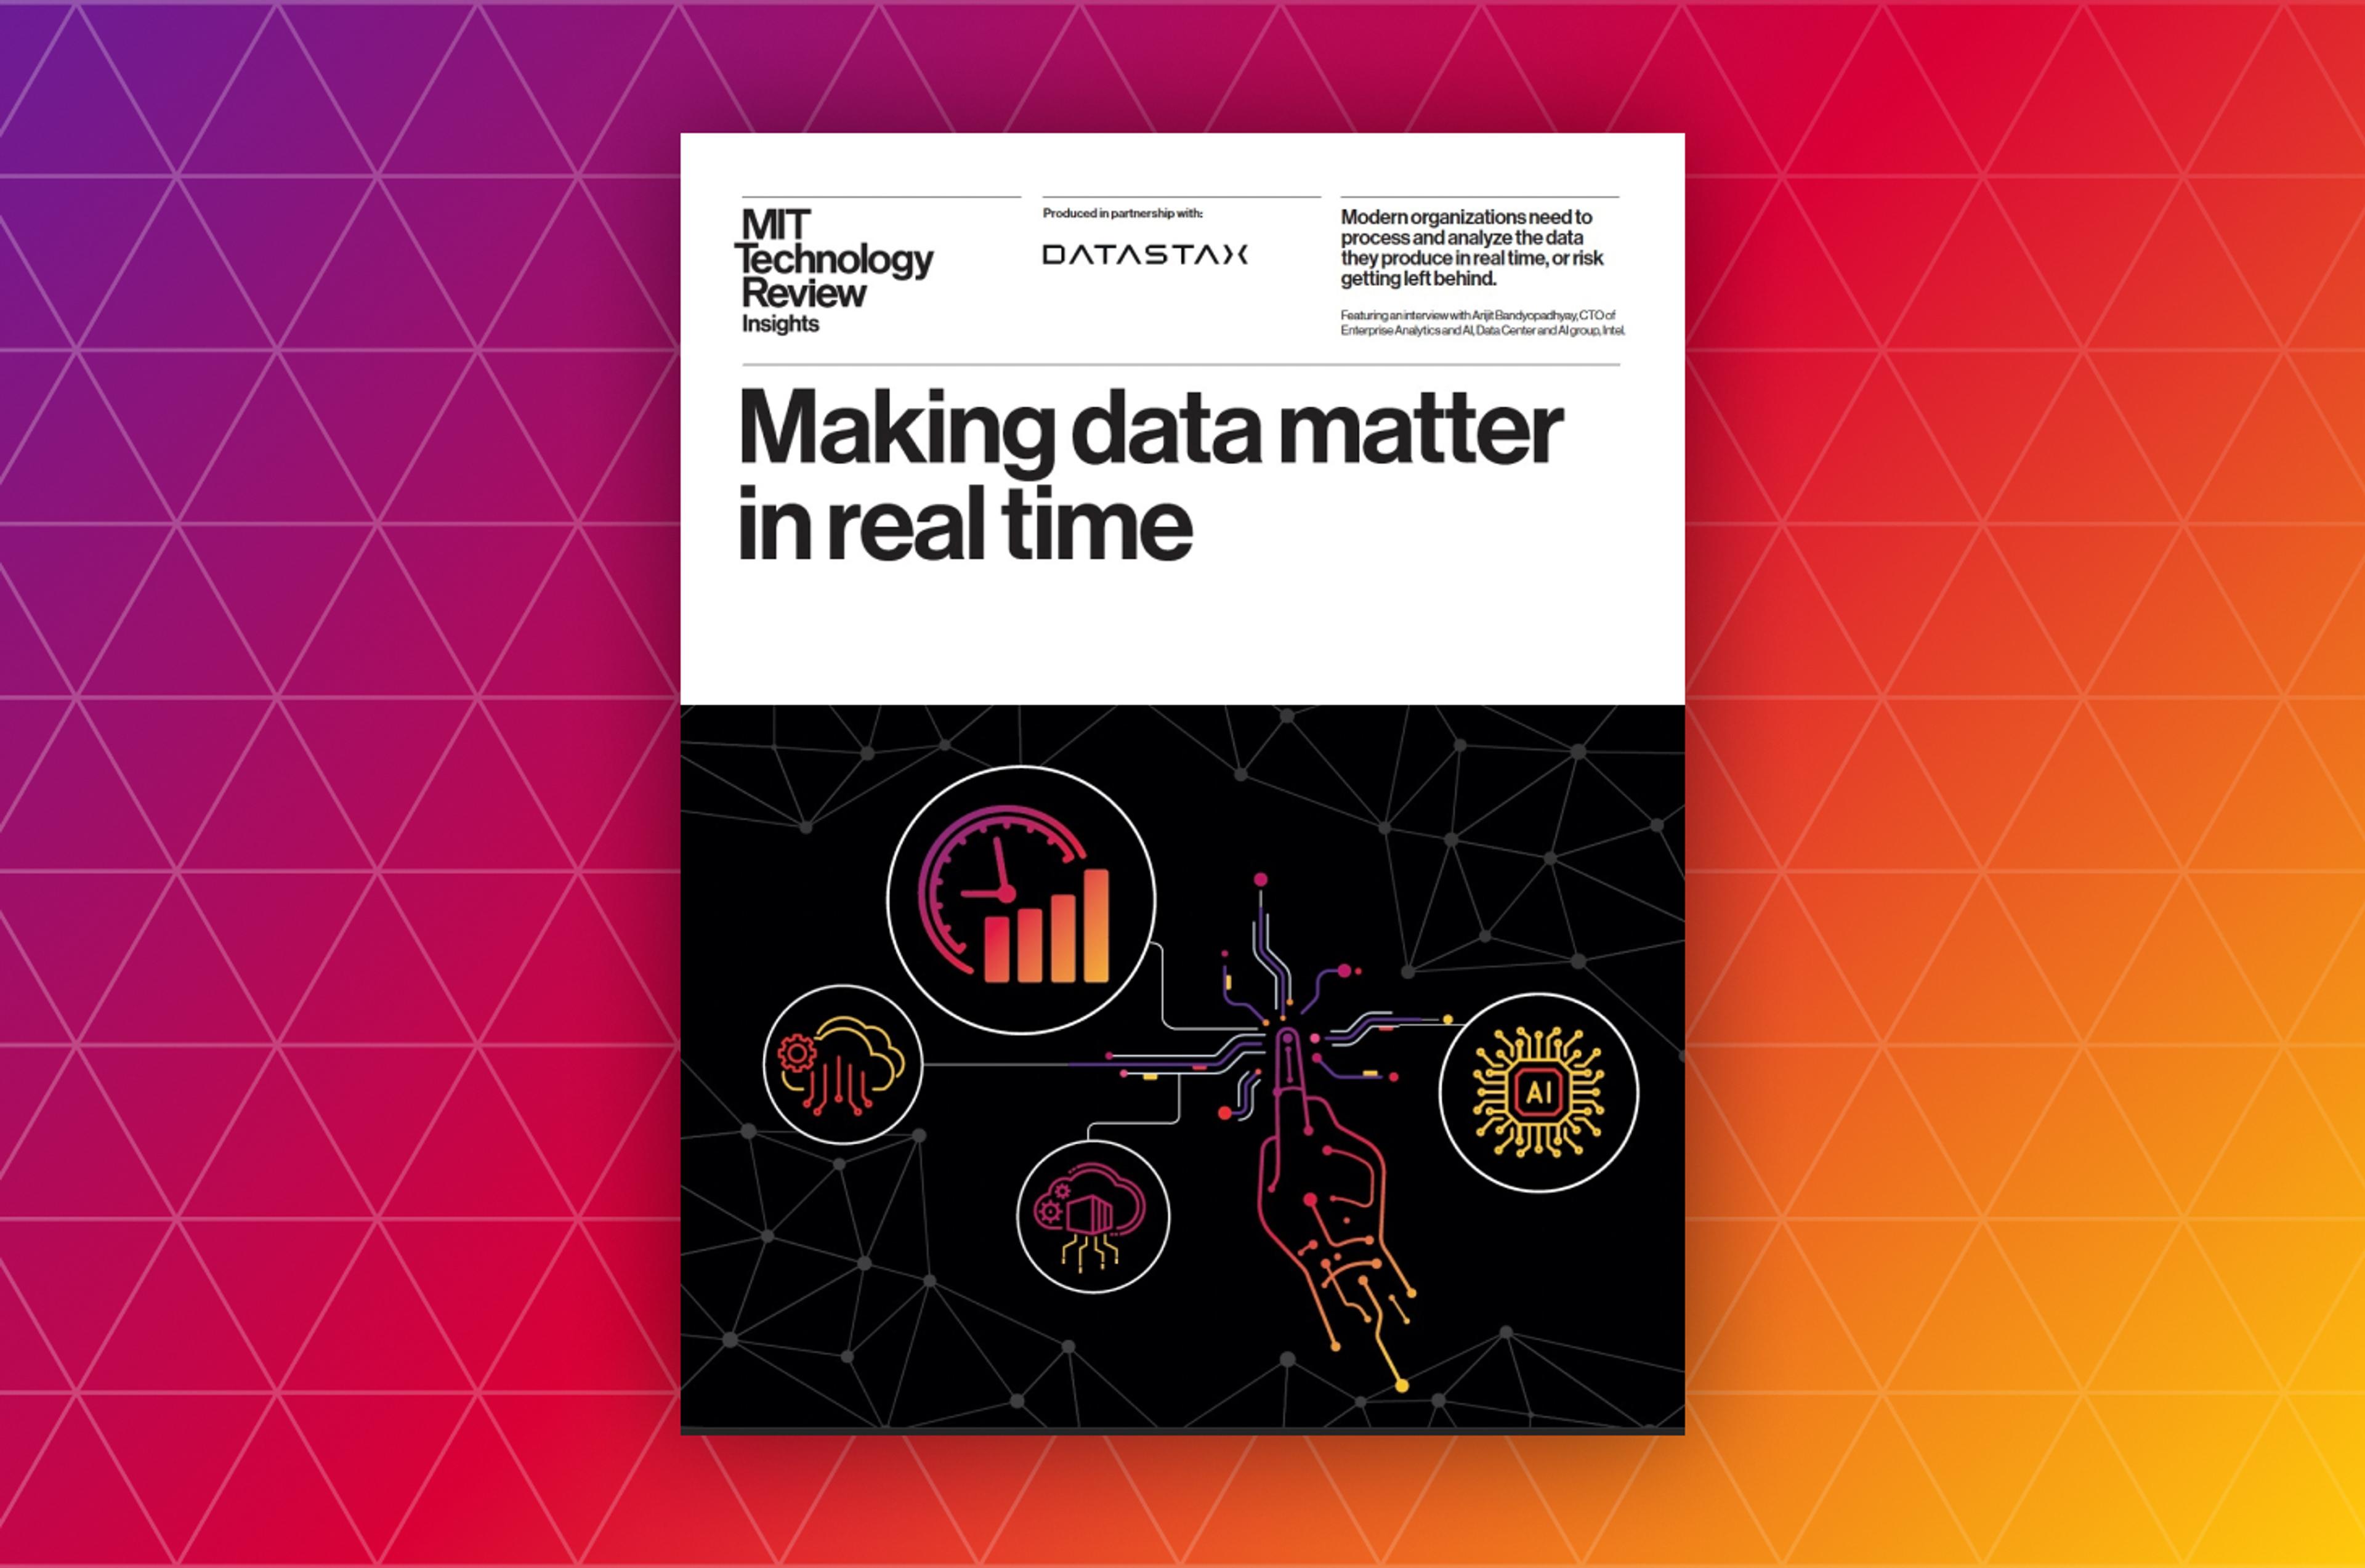 Here's What Leaders at Intel, Rakuten, and Uniphore Have to Say About Real-Time Data